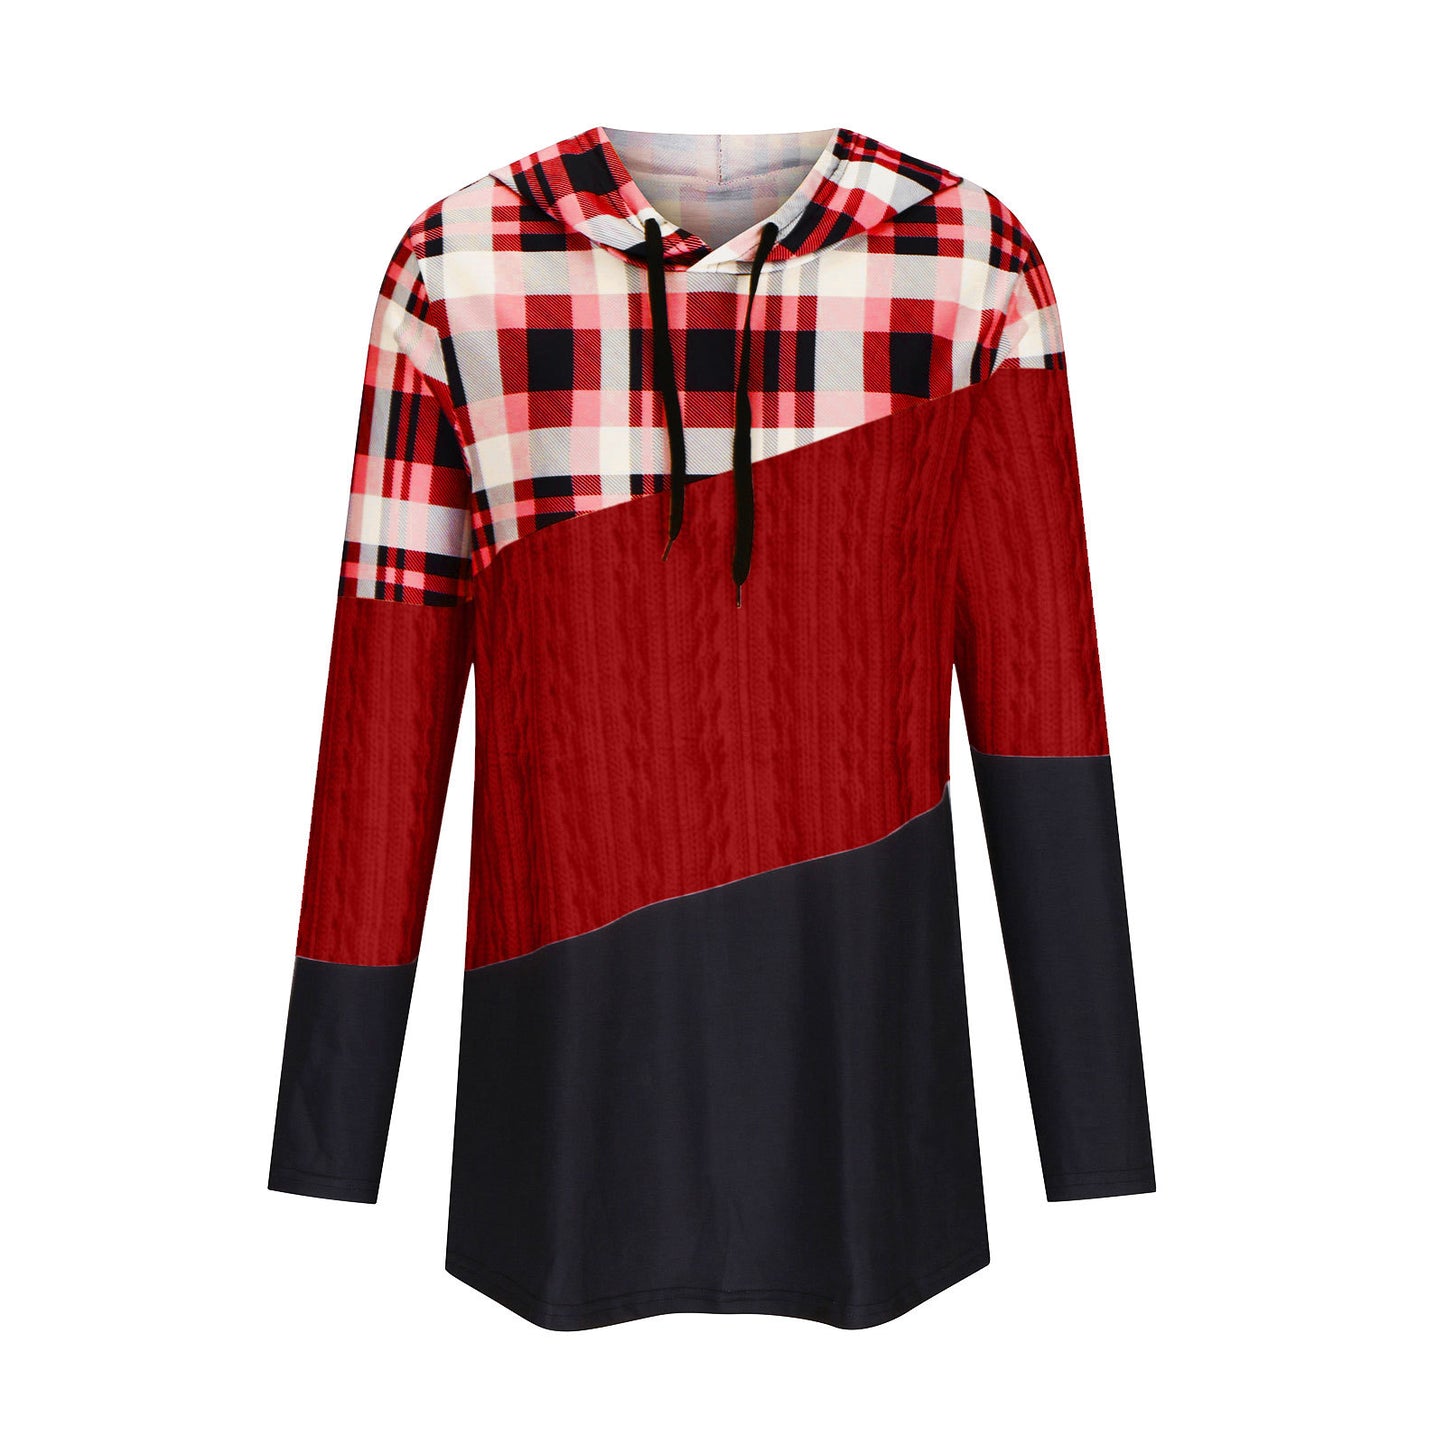 Hooded Printed Sweater for Women with Comfortable Long Sleeves